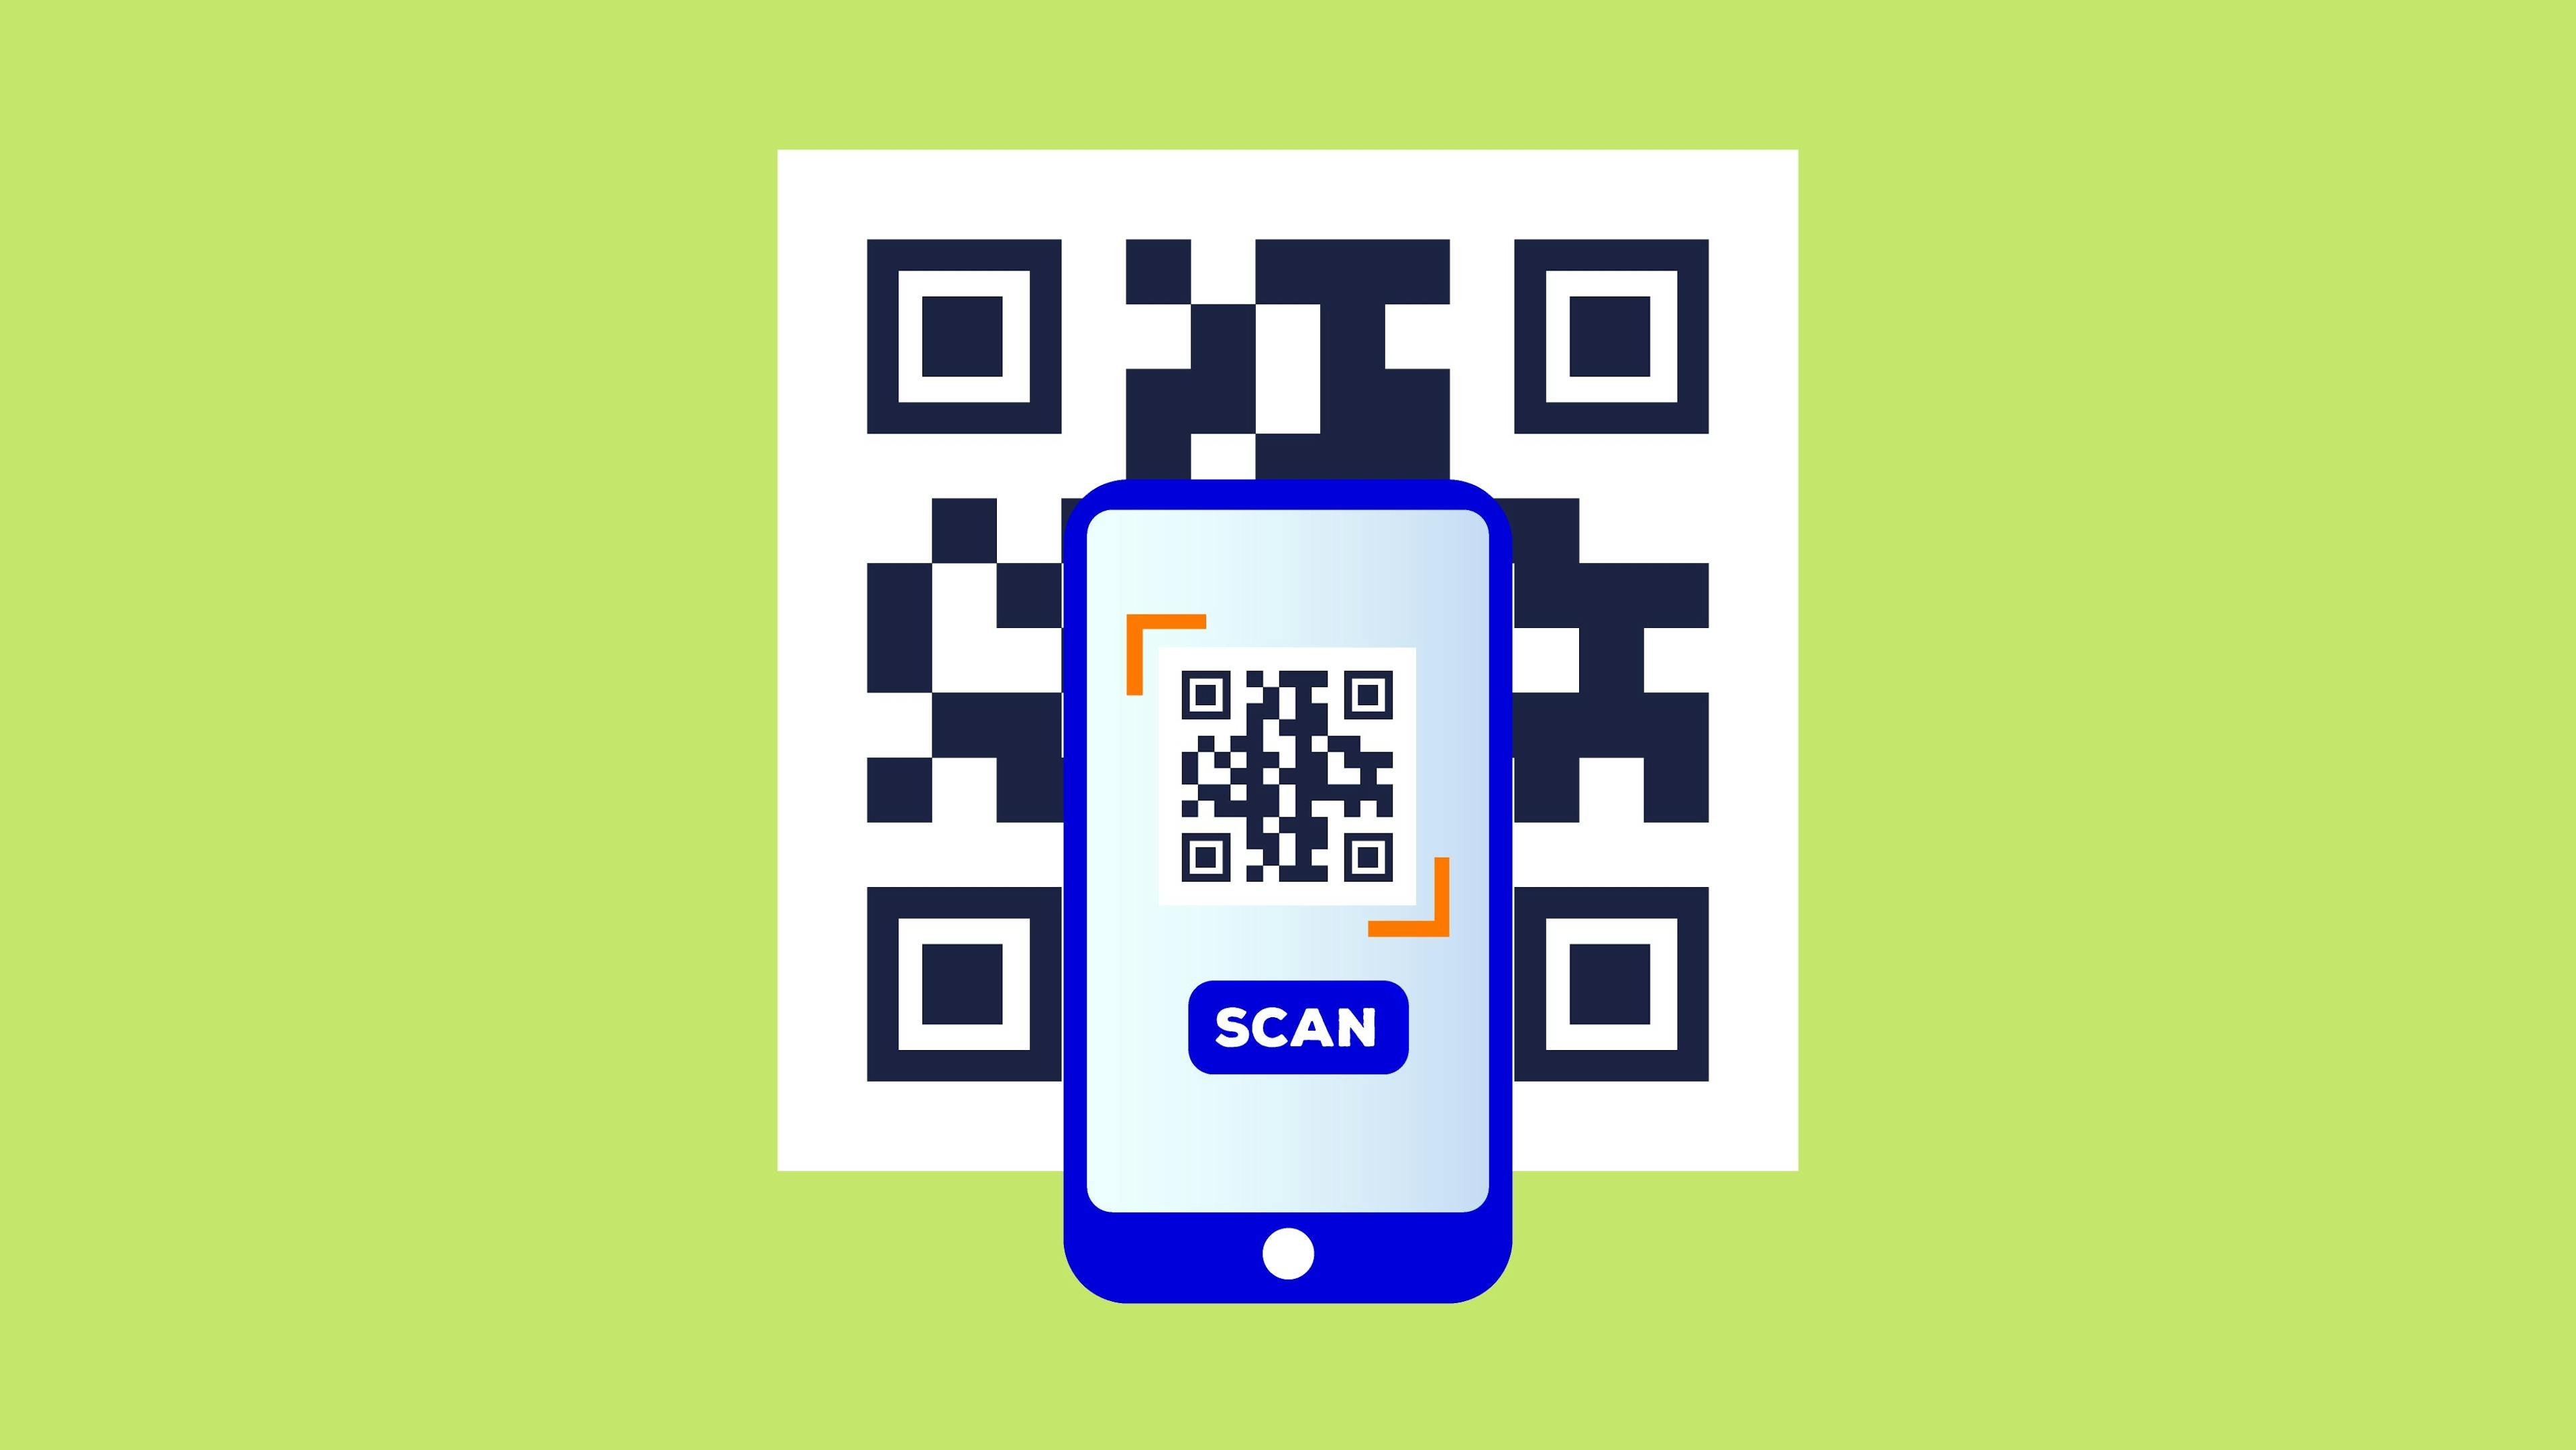 QR code definition – What it is and why you need it